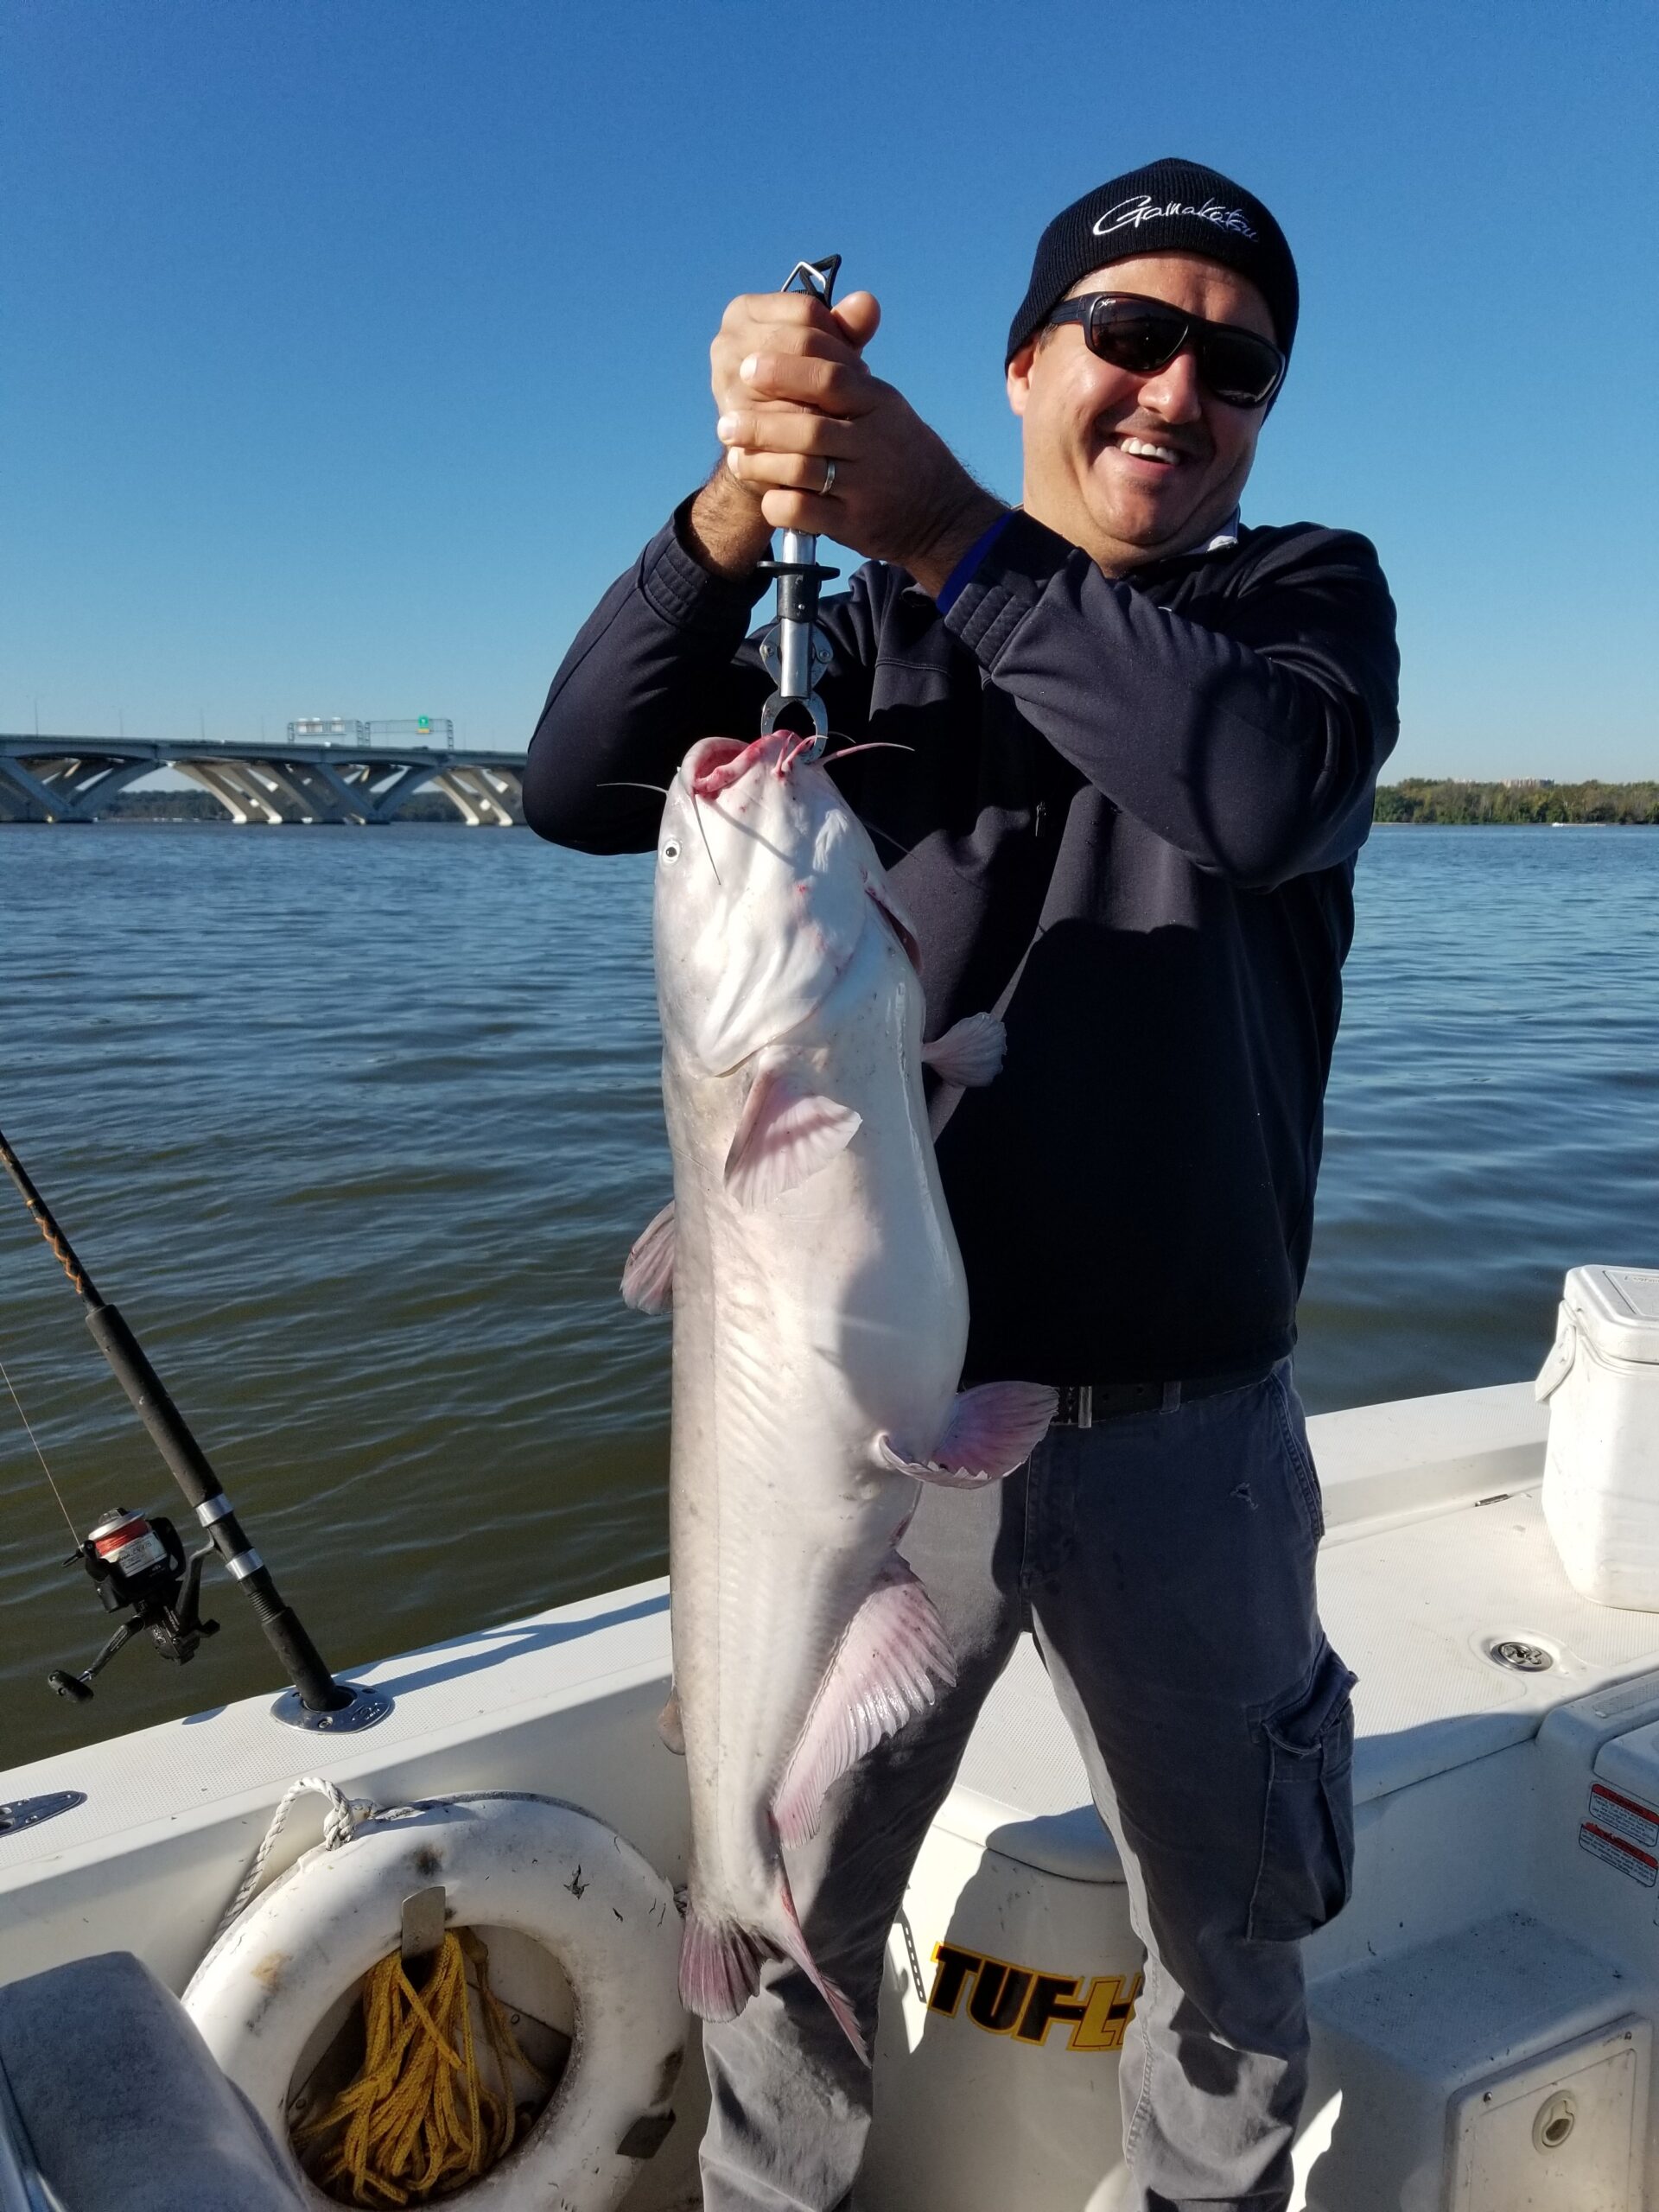 https://indianheadcharters.com/wp-content/uploads/2021/11/10-20-21-1-scaled.jpg